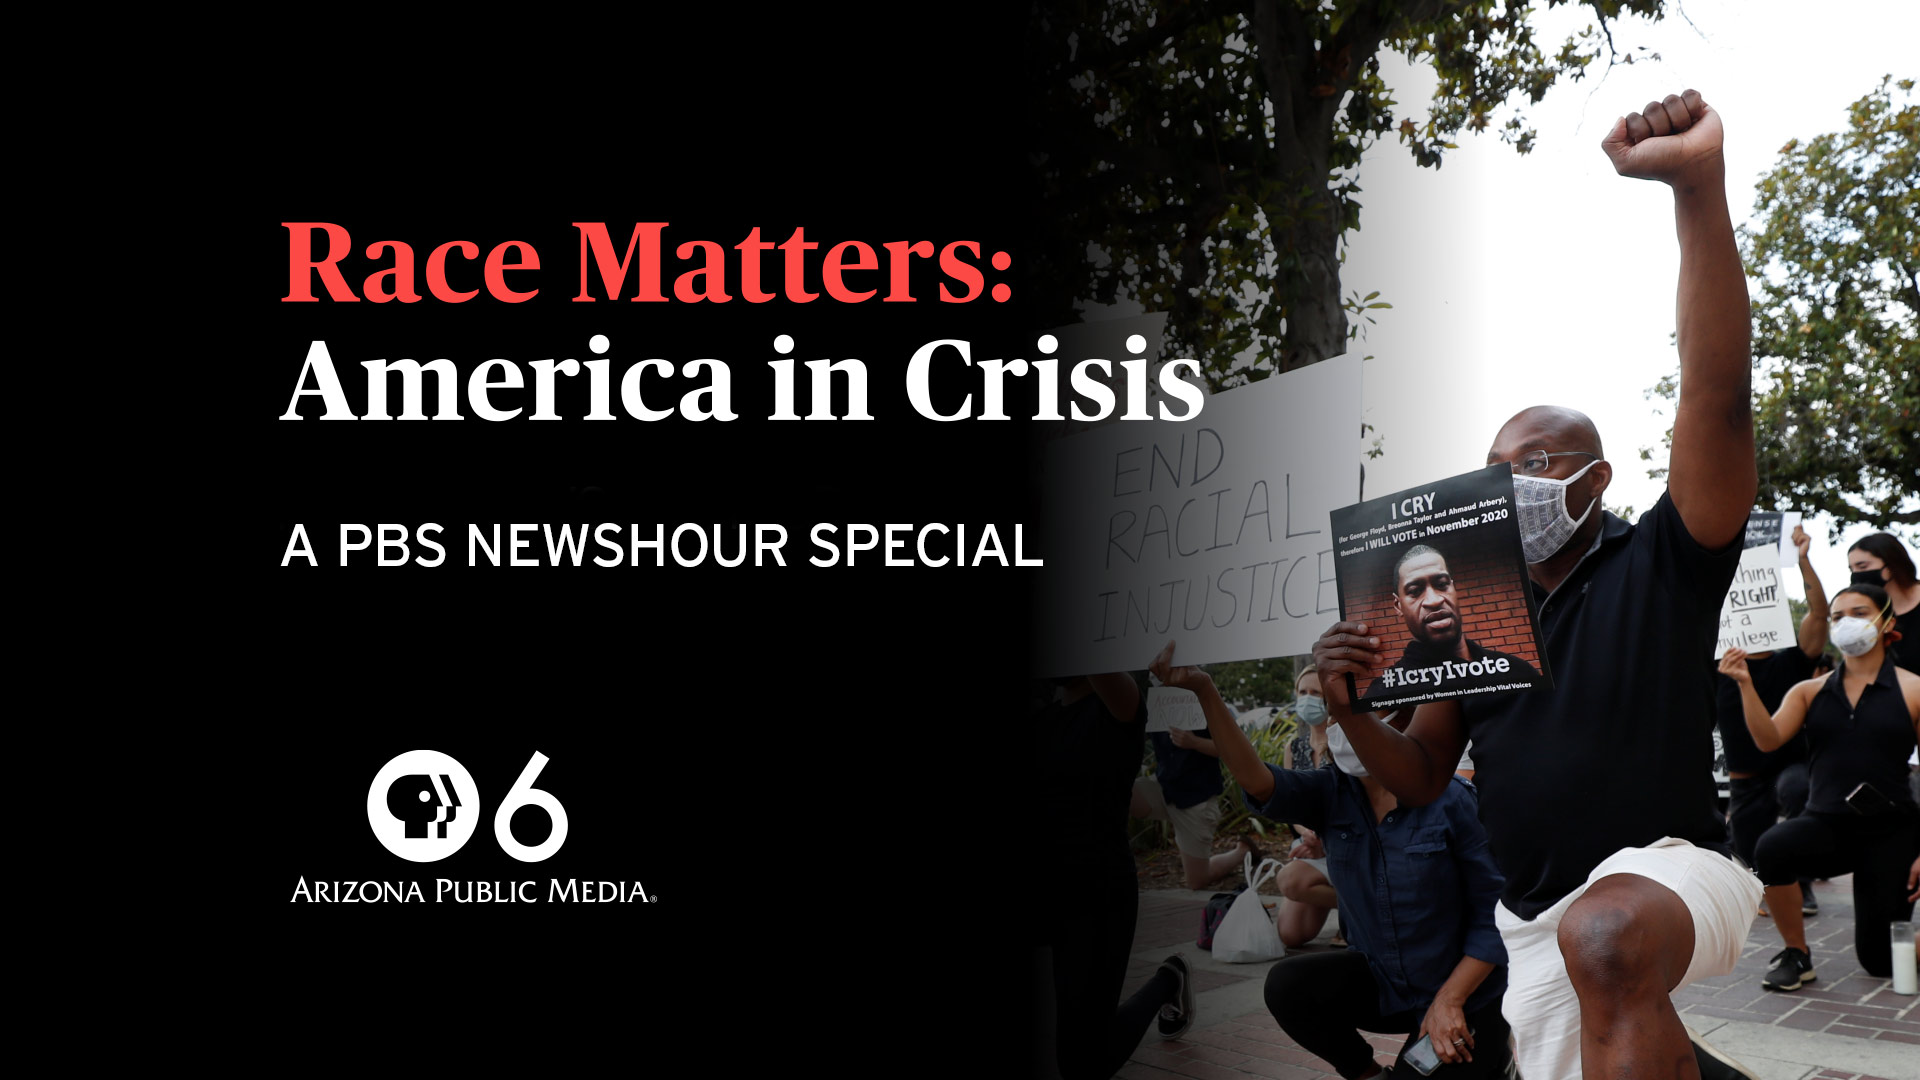 PBS NewsHour will examine the deep systemic racial disparities in the criminal justice system in a special called “Race Matters: America in Crisis”, airing Friday, June 5 at 9 p.m. on PBS 6.